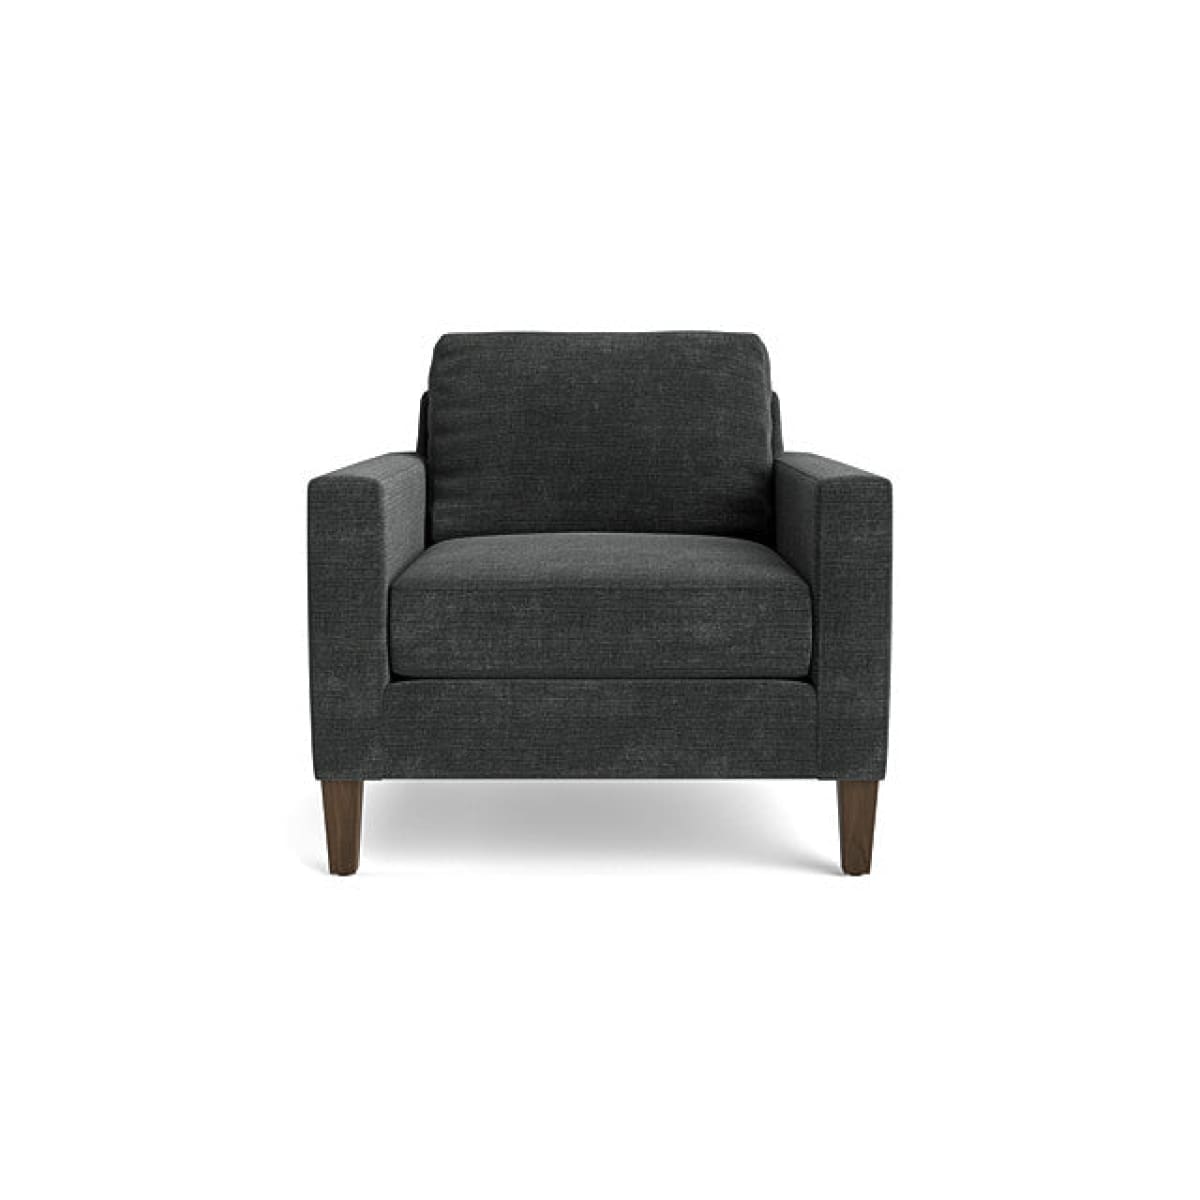 Kent Accent Chair - Analogy Charcoal